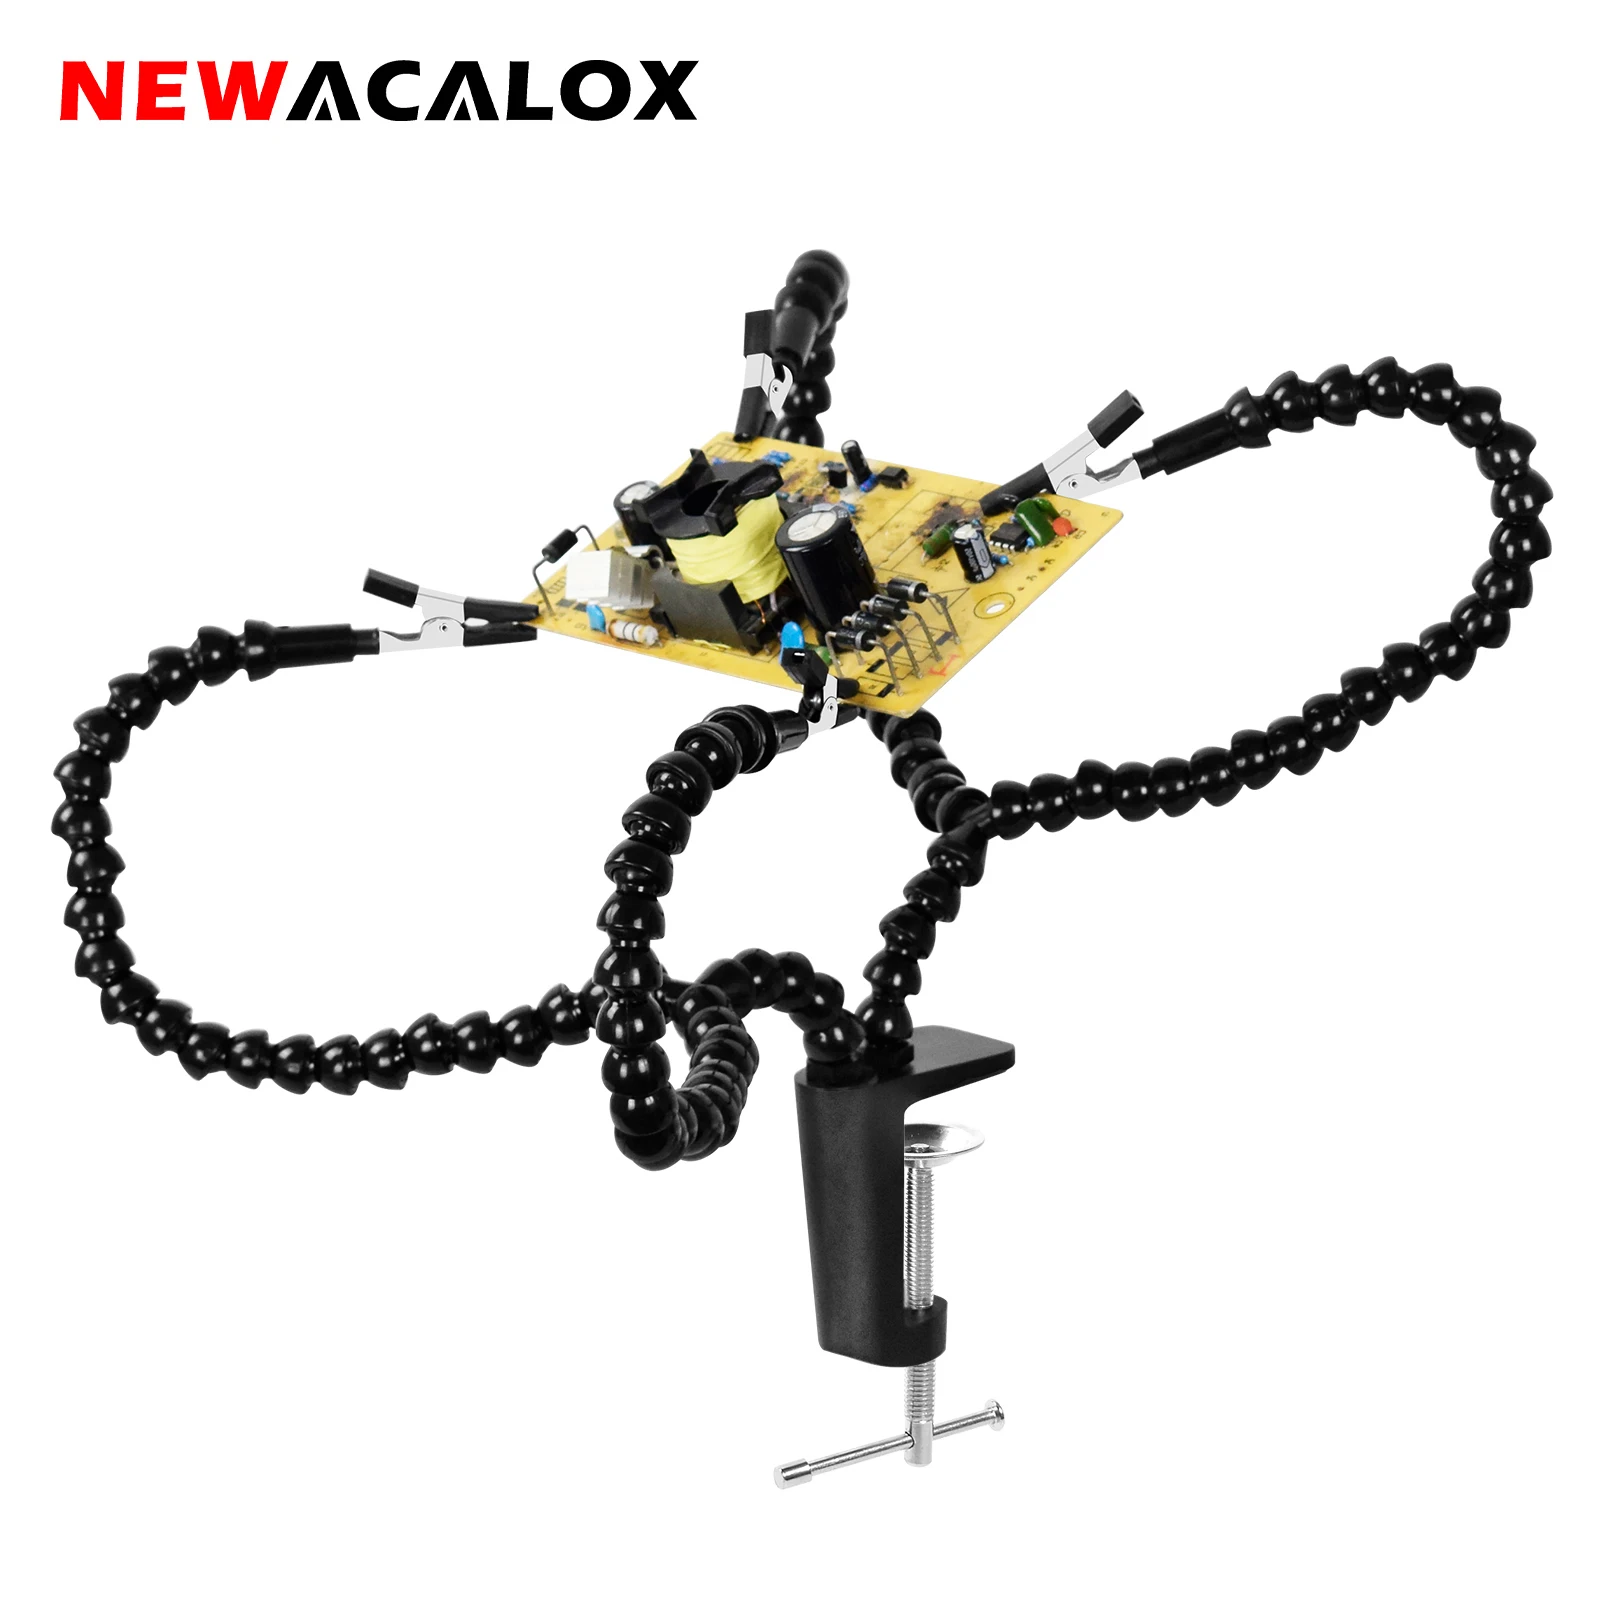 NEWACALOX 4 Pcs Flexible Arm Helping Hands Third Hand Soldering Tool PCB Holder  Welding Stand for PCB Repairing Circuit Board newacalox 320mm 150 mm magnetic flexible arm with 2pc 360 degree alligator clip pcb board clip welding auxiliary tool third hand